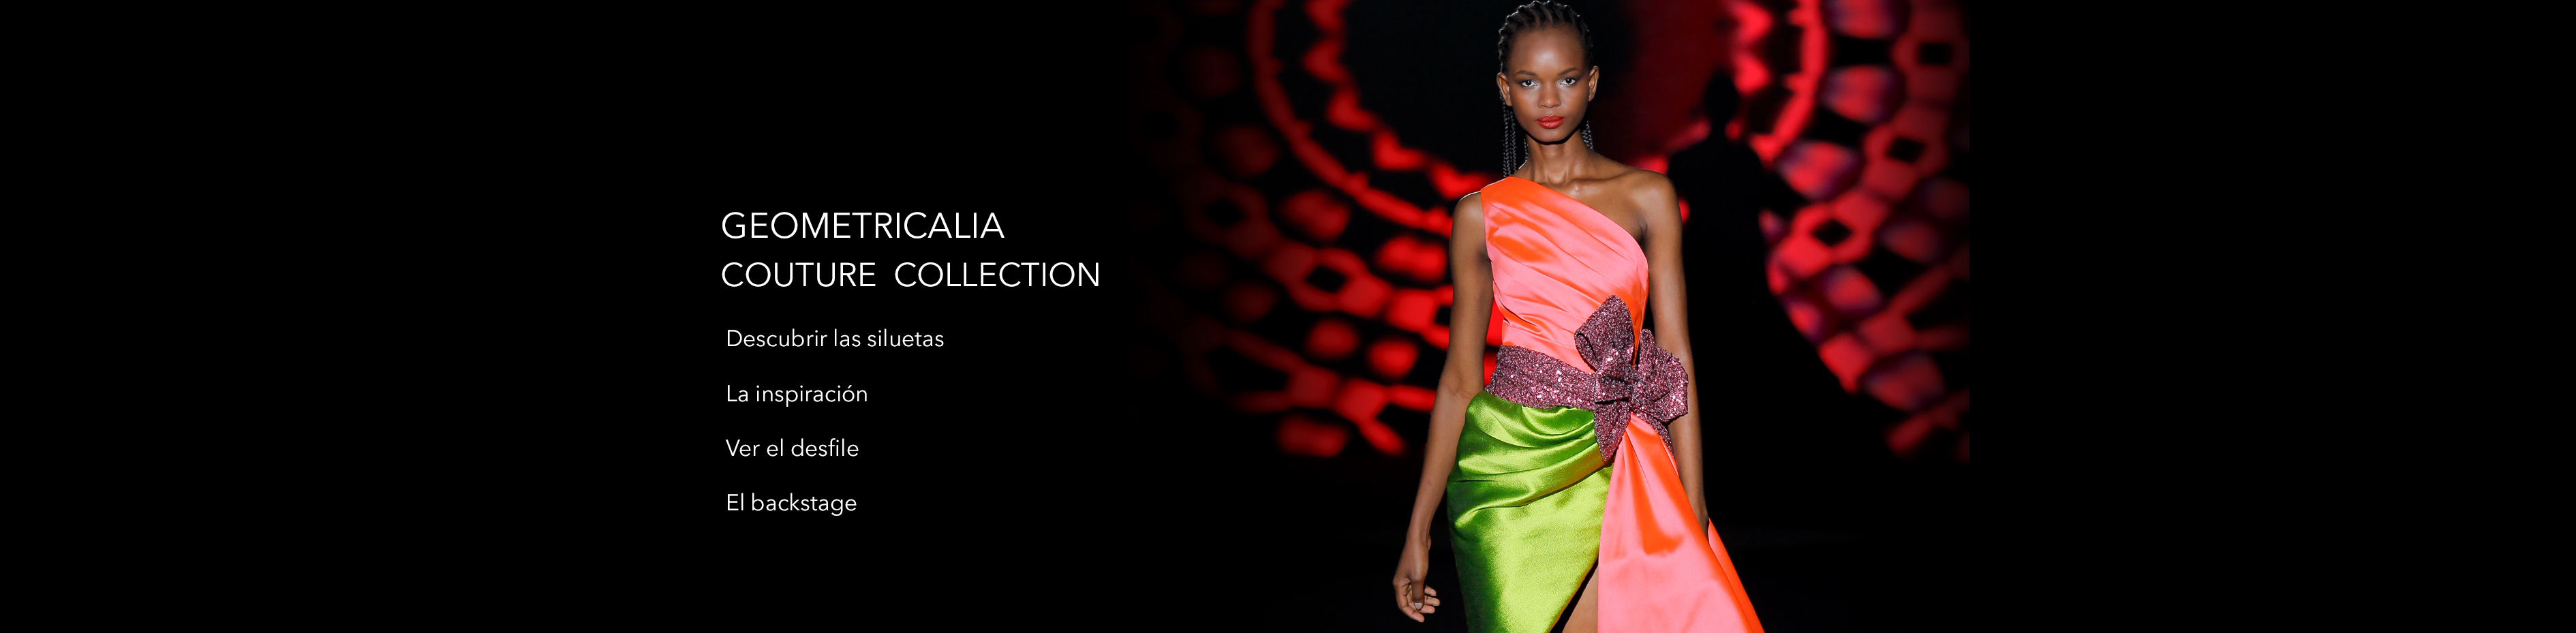 GEOMETRICALIA / COUTURE COLLECTION